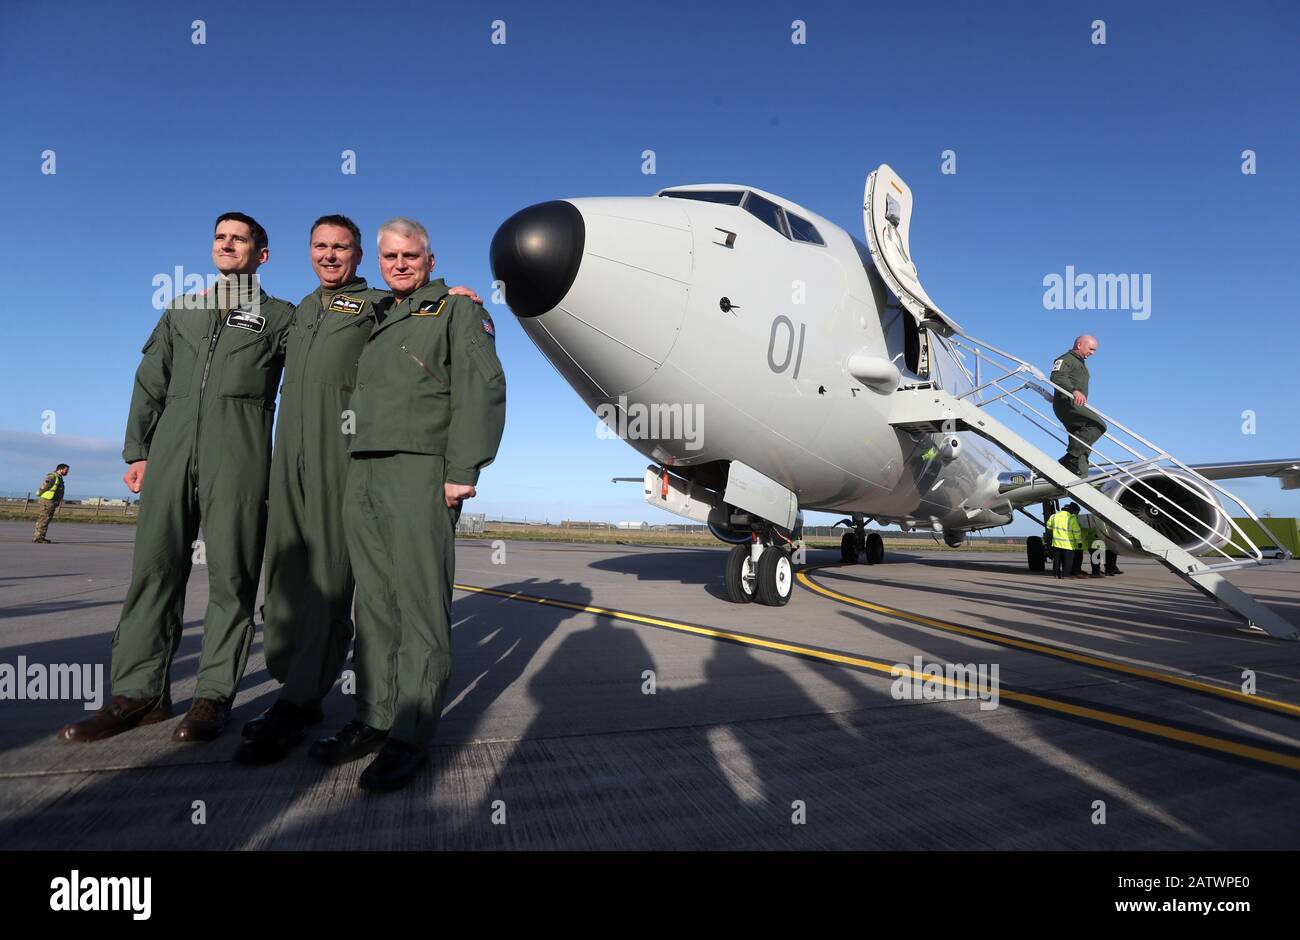 Squadron Leader Mark Faulds ( c) poses for a photograph at Kinloss Barracks in Morayshire after he flew-in the UK's first submarine-hunting P-8A Poseidon maritime patrol aircraft from NAS Jacksonville in the USA. Picture date: Tuesday February 4, 2020. The UK is buying nine of the Boeing jets which are equipped with sensors and weapons systems for anti-submarine warfare, as well as surveillance and search and rescue missions. The aircraft will be based at Kinloss Barracks until they move permanently to RAF Lossiemouth whose runway is currently being resurfaced. Photo credit should read: Andrew Stock Photo